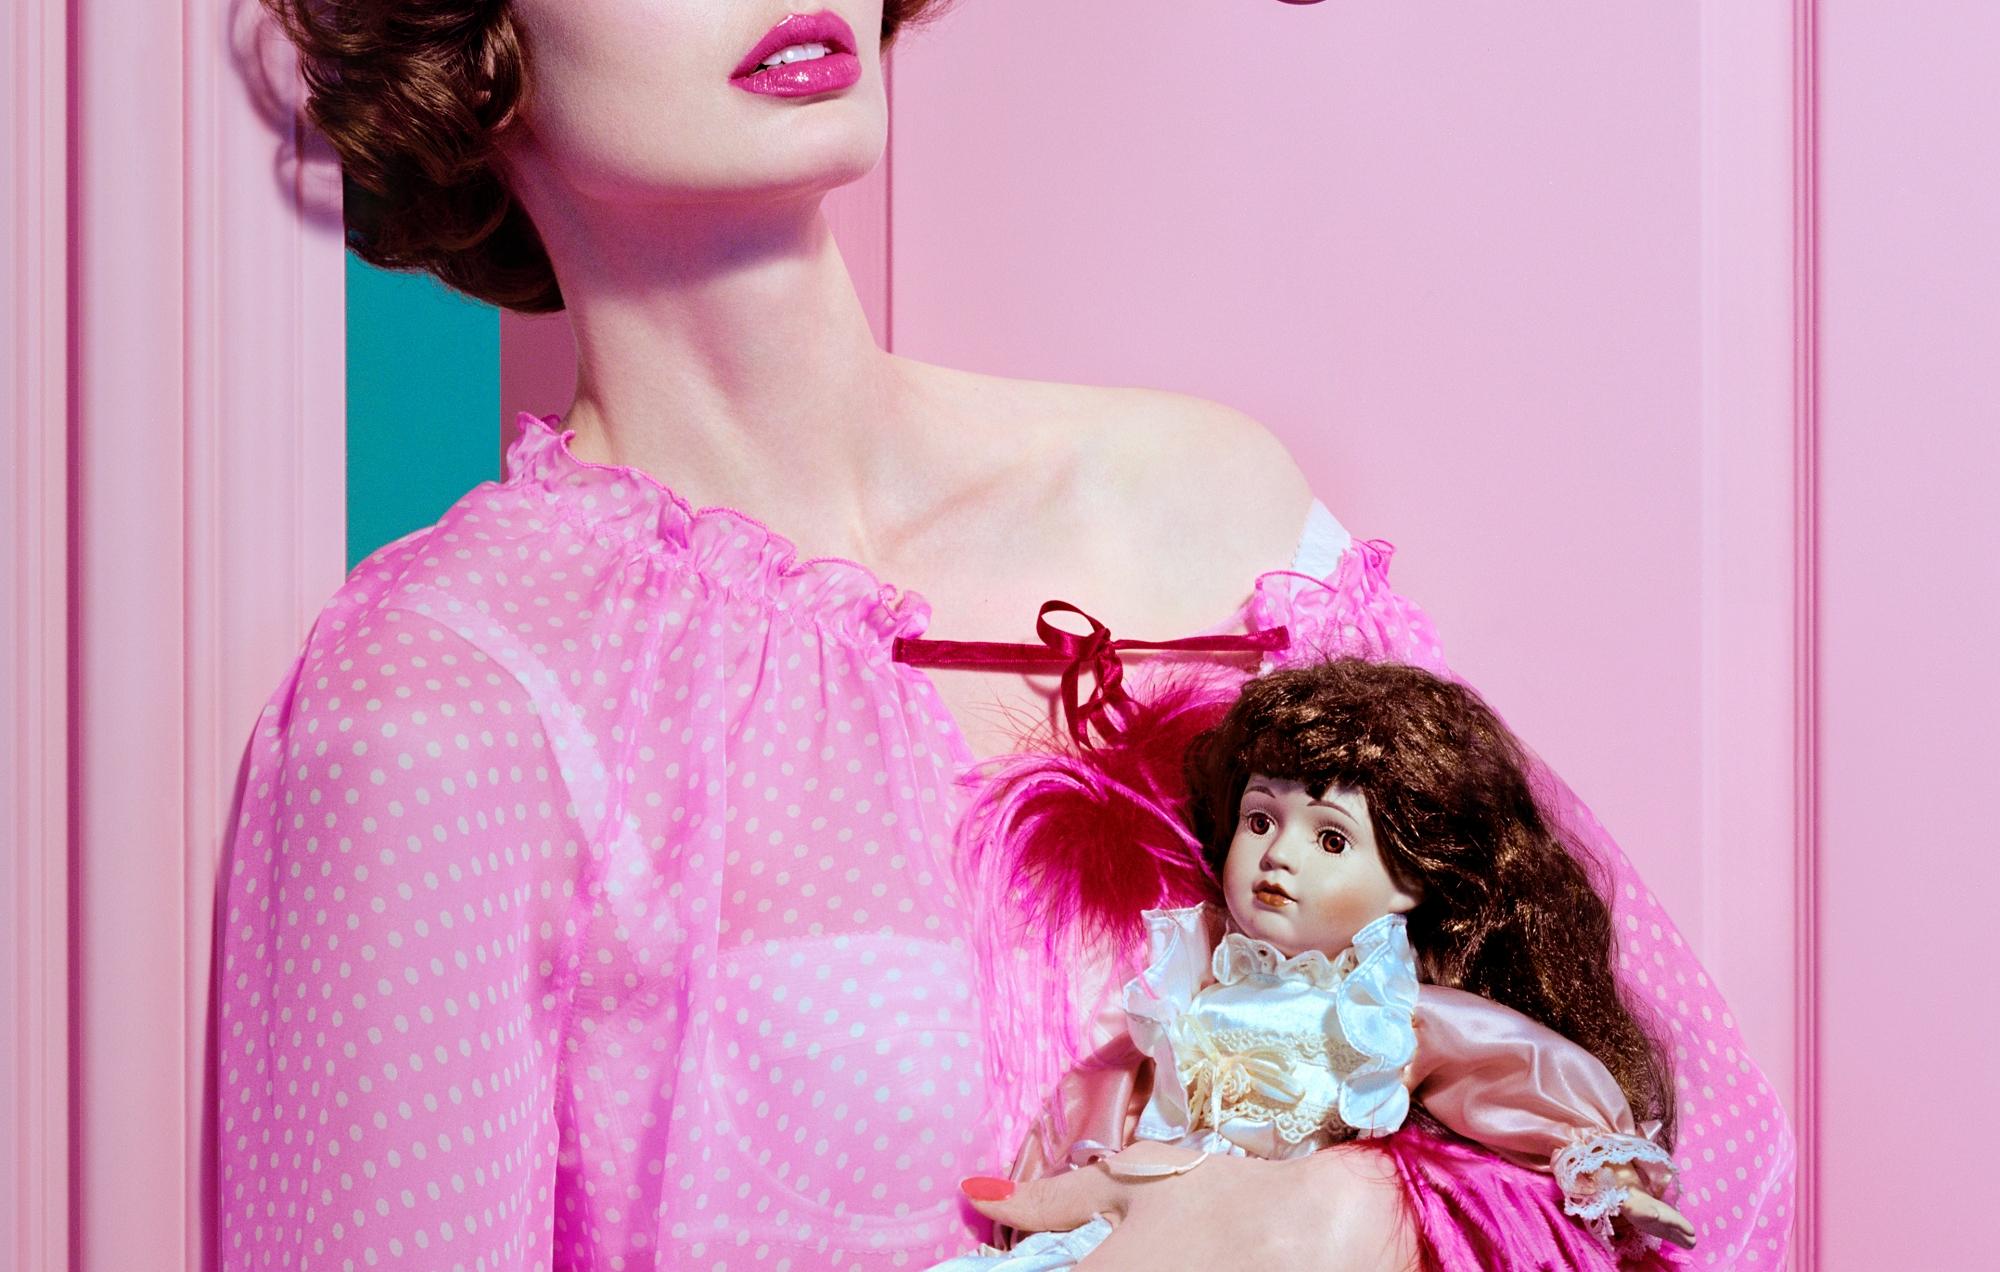 MILES ALDRIDGE (*1964, Great Britain) 
Doors #5, 2023
Screenprint in colours
Sheet 73 x 100 cm (28 3/4 x 39 3/8 in.)
Edition of 15, plus 3 AP; Ed. no. 1/15
Print only


A fiercely original photographer, Miles Aldridge (*1964, Great Britain) is best